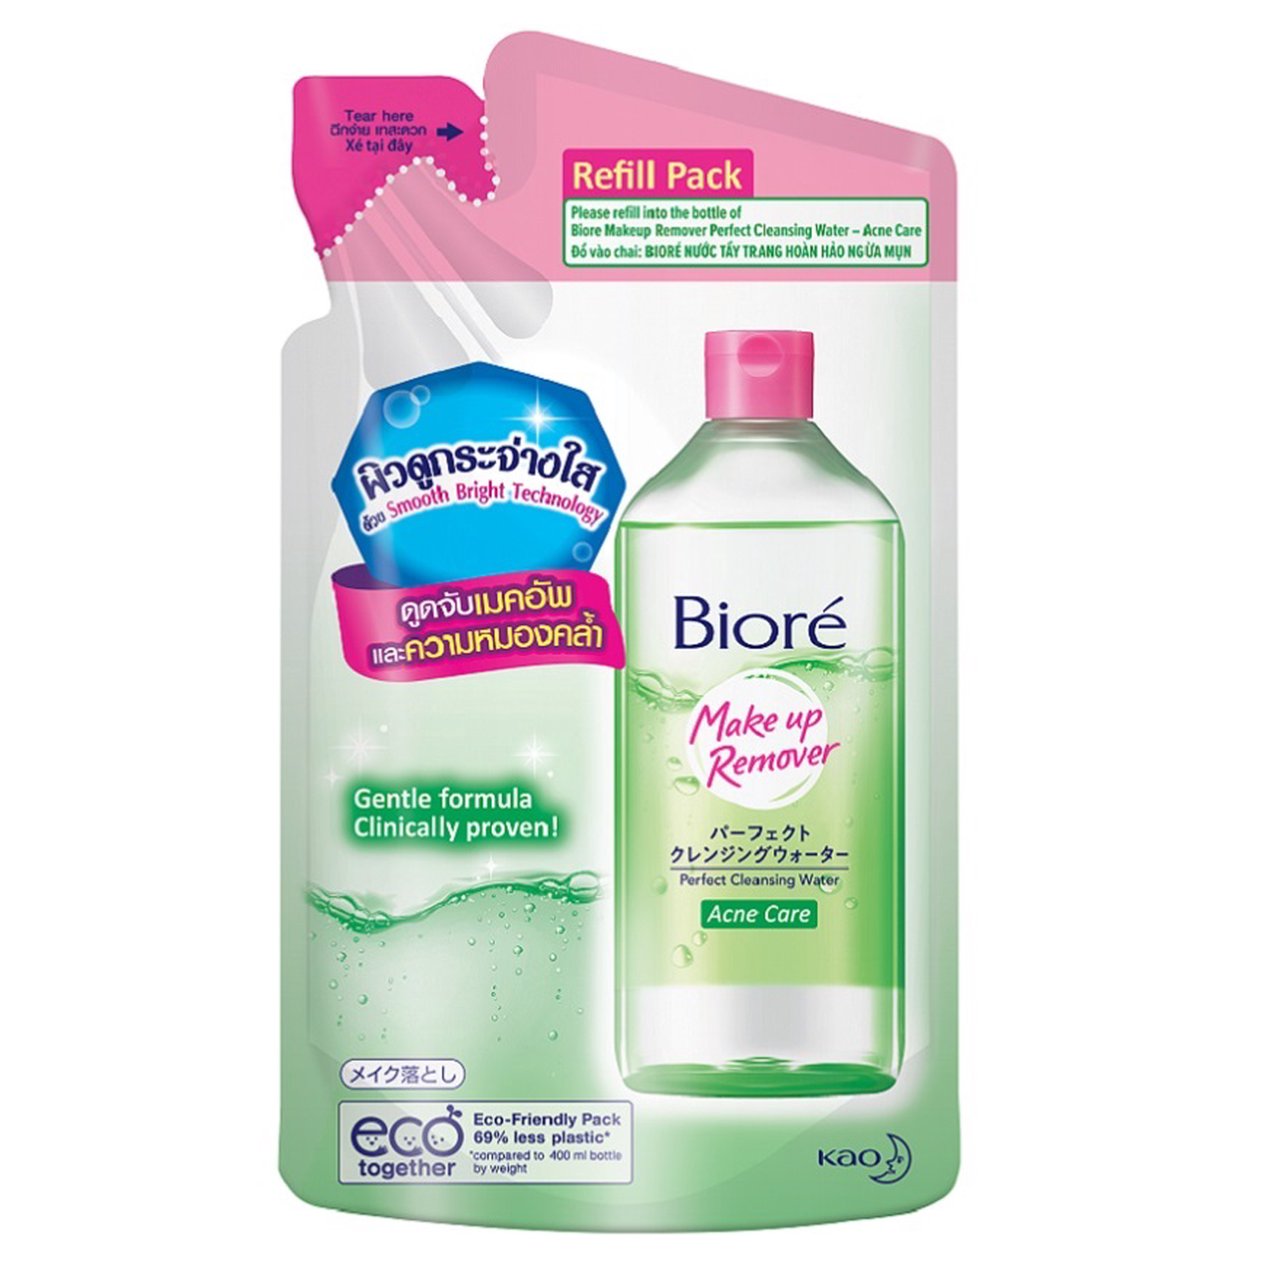 BIORE Perfect Cleansing Water Acne Care Refill Pack (250ml)